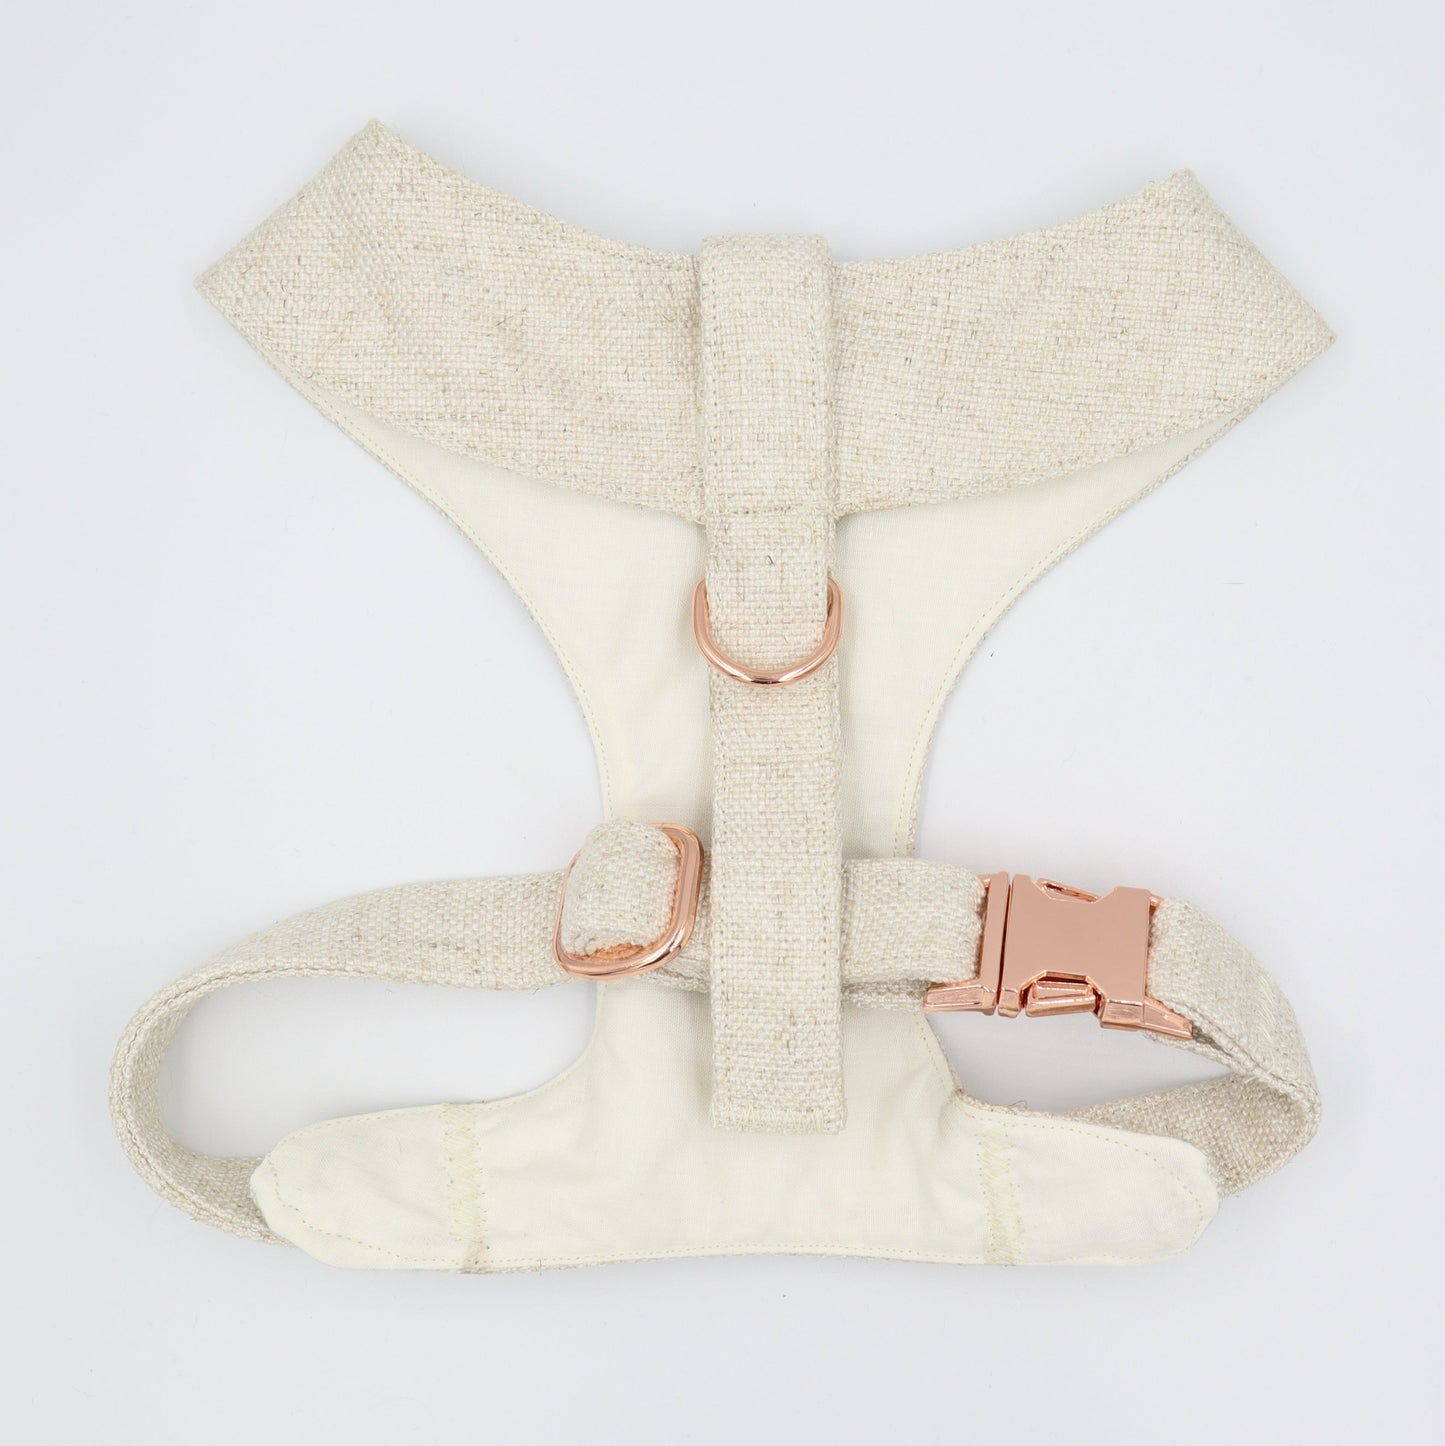 Tuxedo Wedding Dog Harness in Beige Natural Linen Style TEXTURED Fabric with Dusty Pink Satin Bow CHOICE of COLOURS